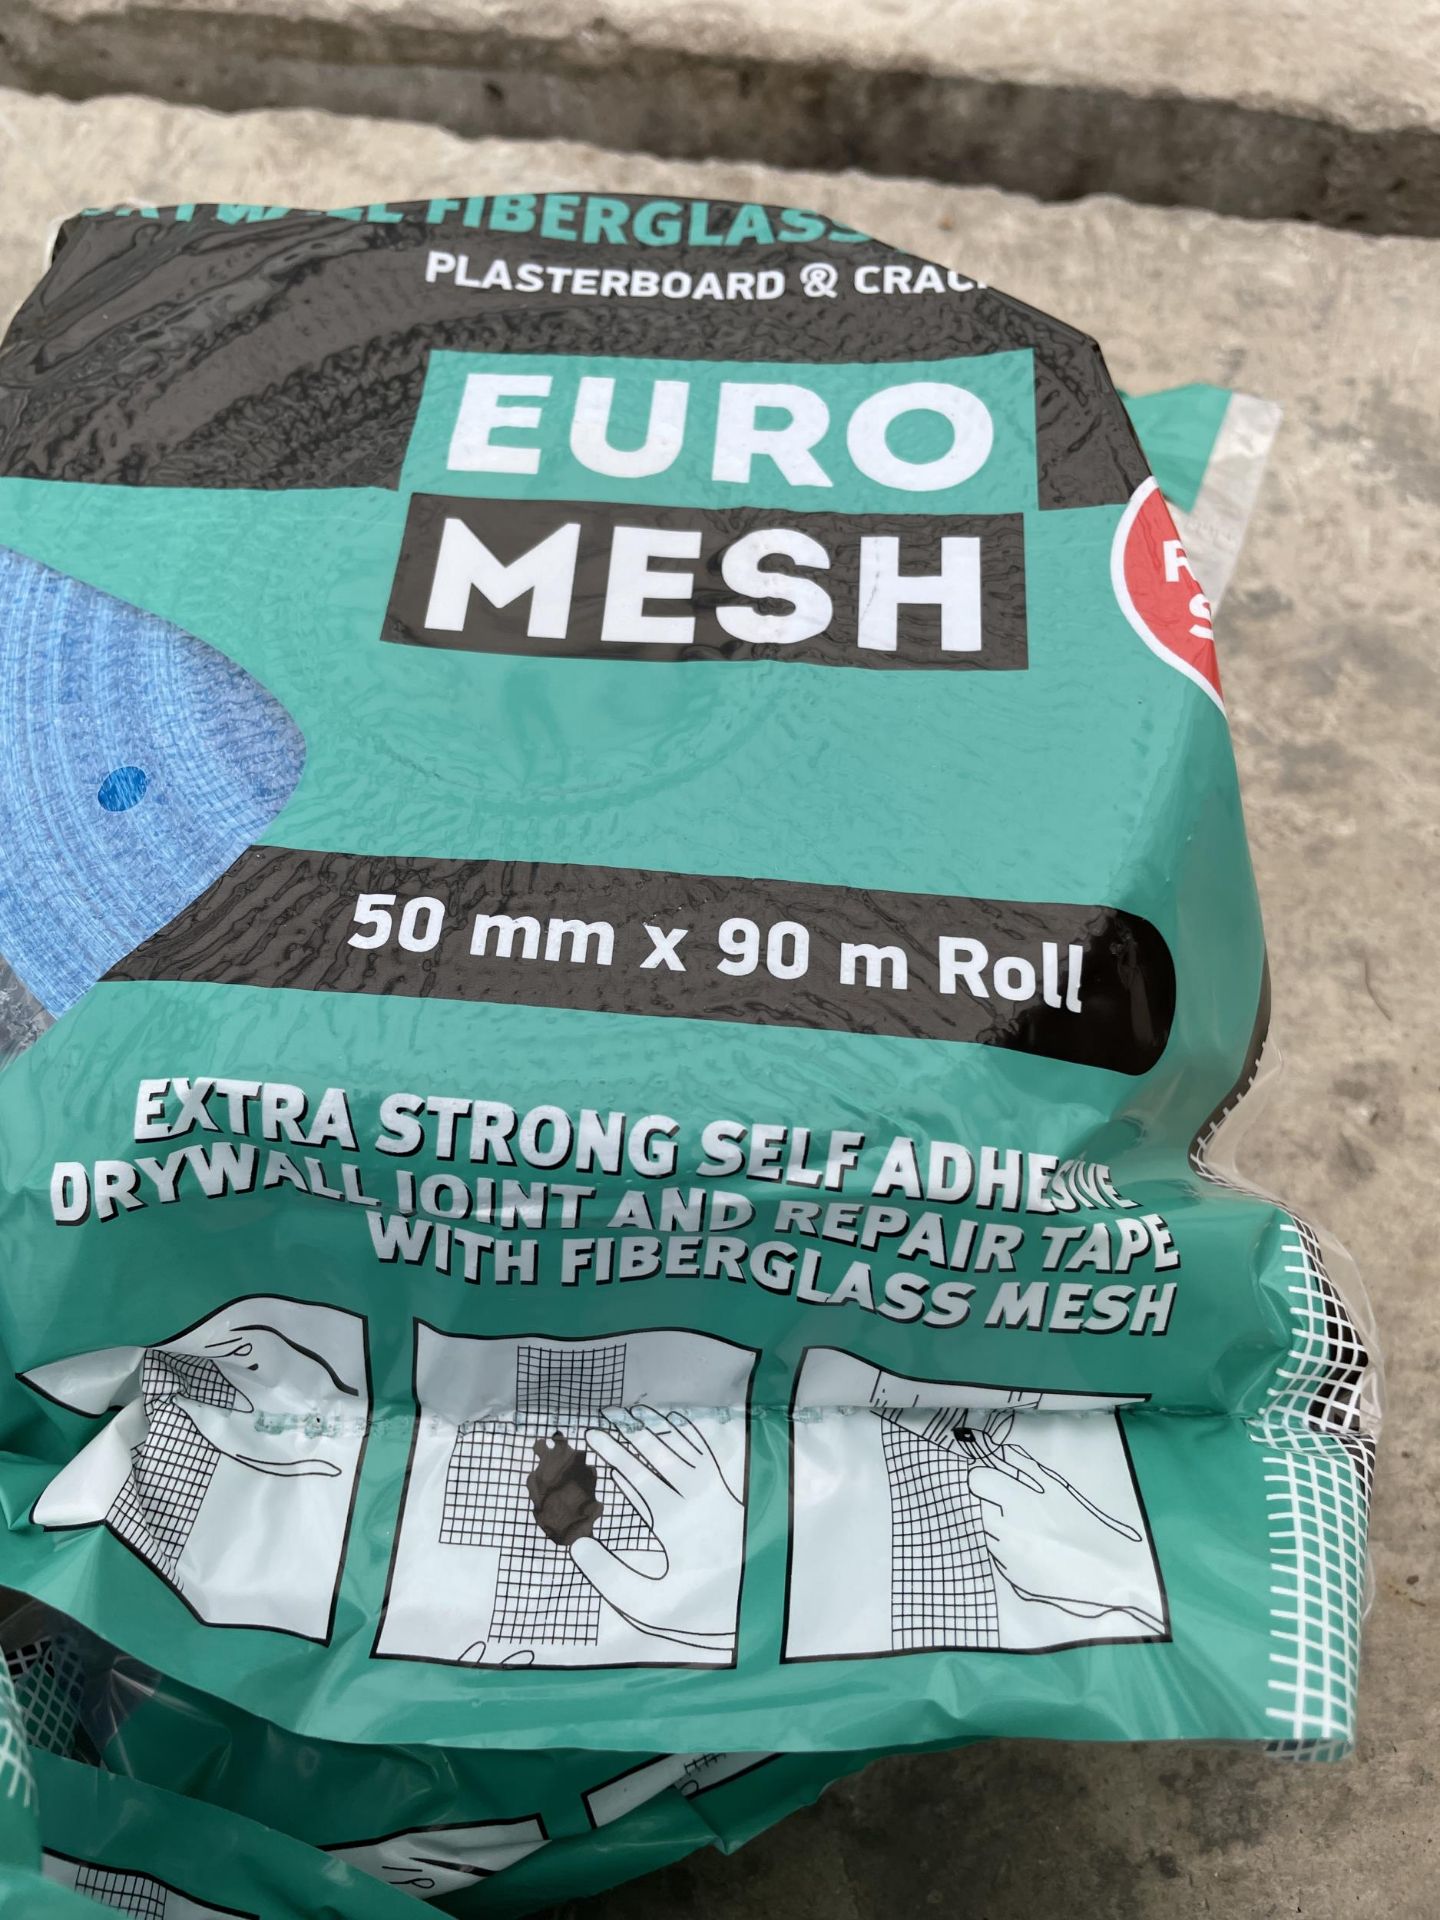 A COLLECTION OF NEW AND PACKAGED EURO MESH PLASTERBOARD CRACK REPAIR TAPE - Image 2 of 2